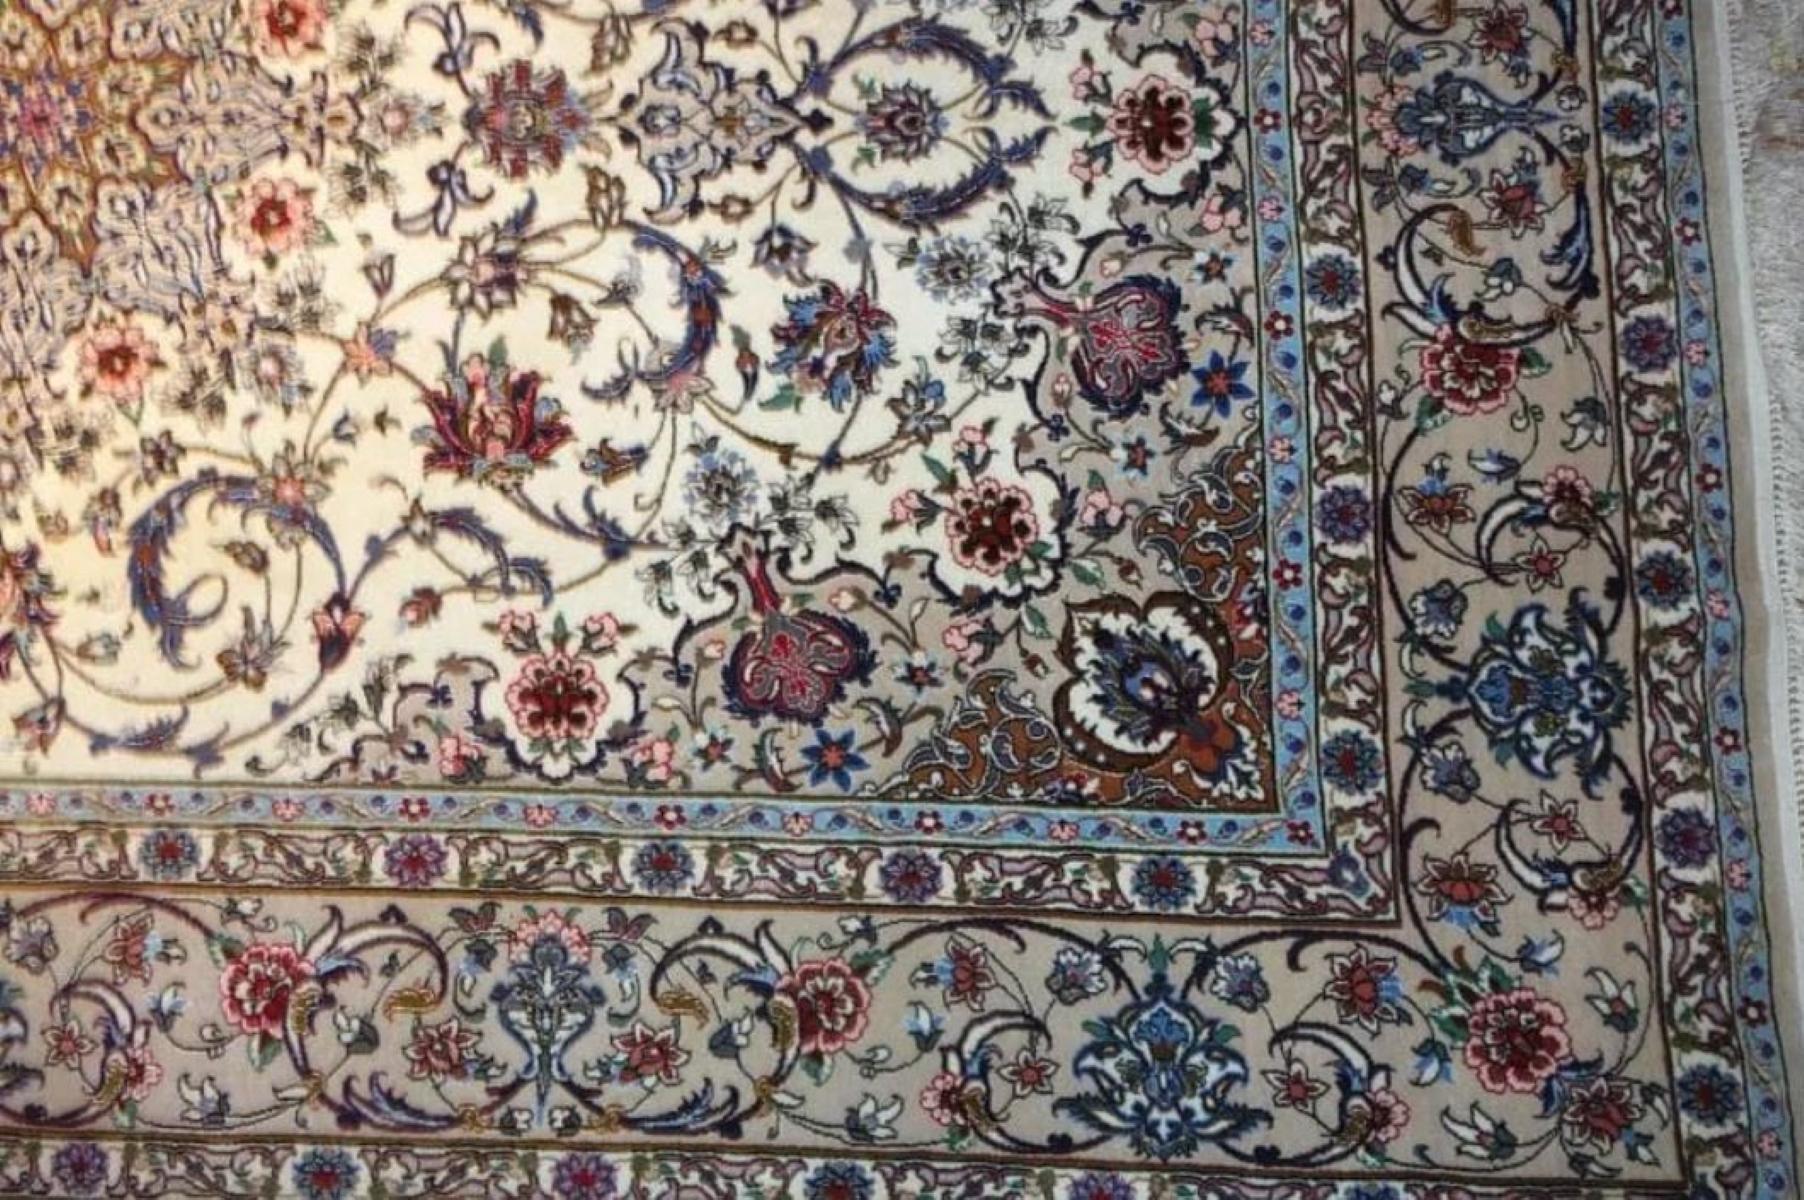 Very fine Persian Rug Isfahan 600 Knots per inch, Size 7.6 x 5 Isfahan Iran Davari Wool and Silk with a Silk Foundation. Around 3,000,000 knots tied by hand one by one. It takes 2 years to complete this piece of art.